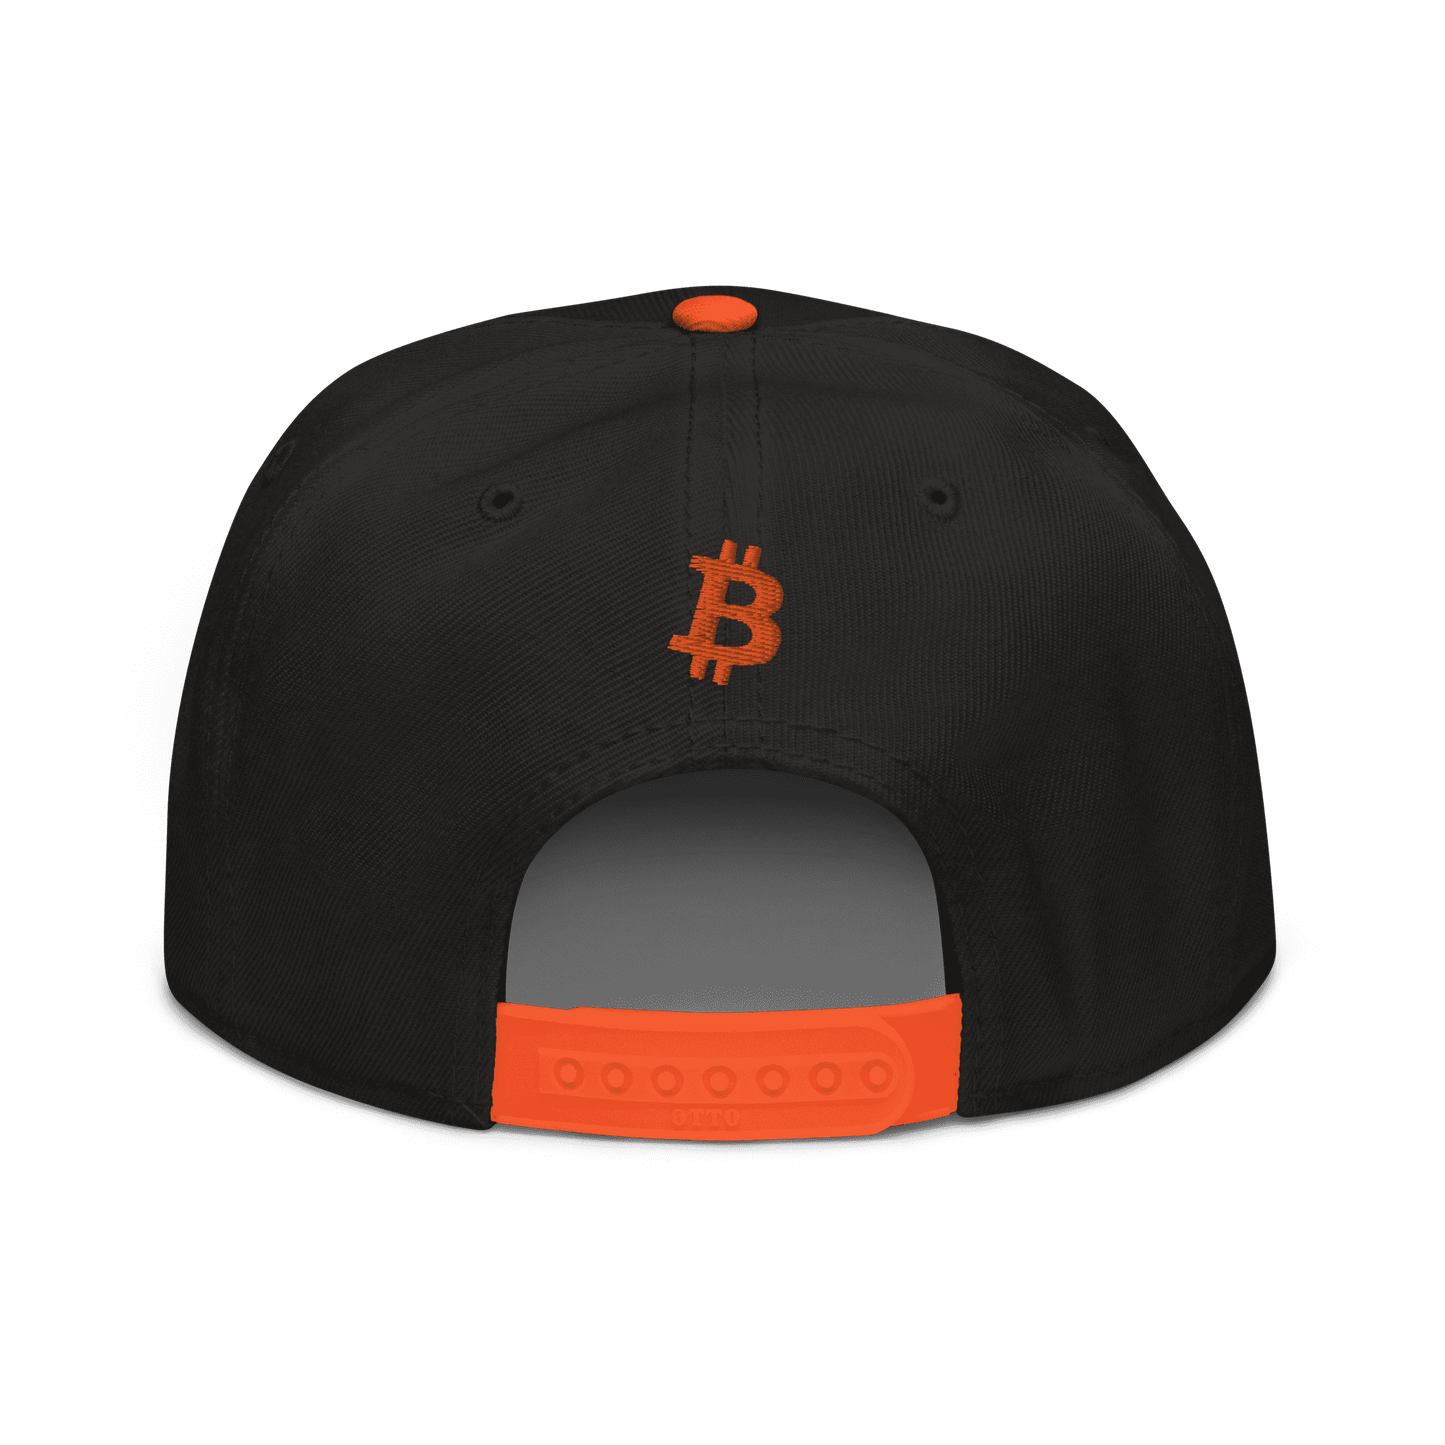 Back view of a black and orange bitcoin snapback hat.